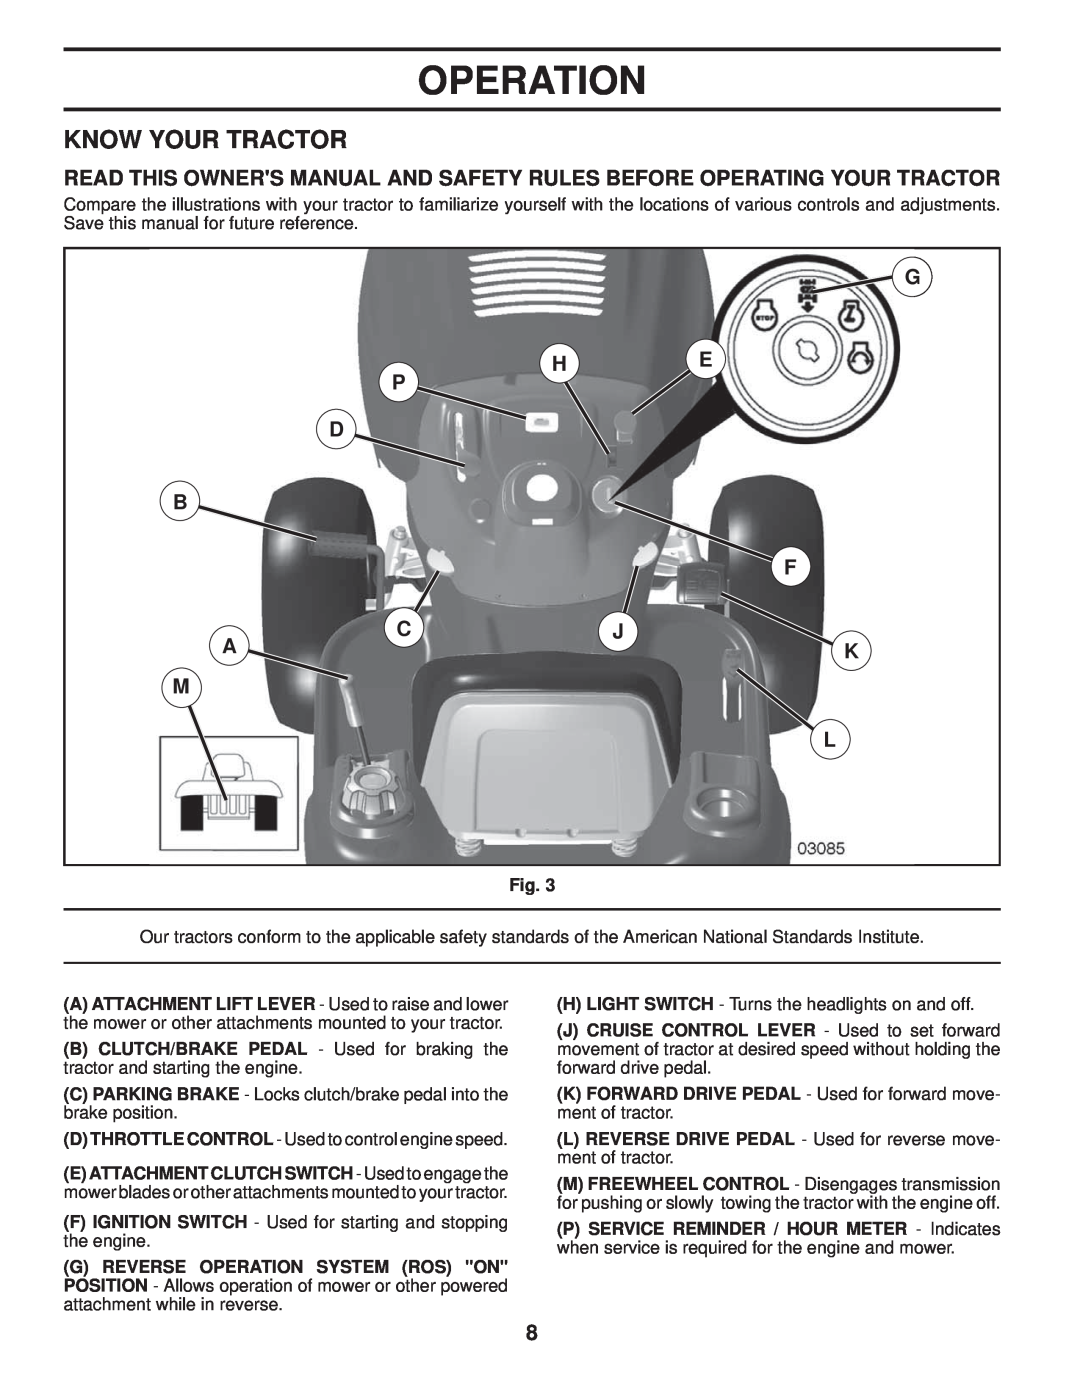 Poulan PPH23B48 manual Know Your Tractor, Operation 